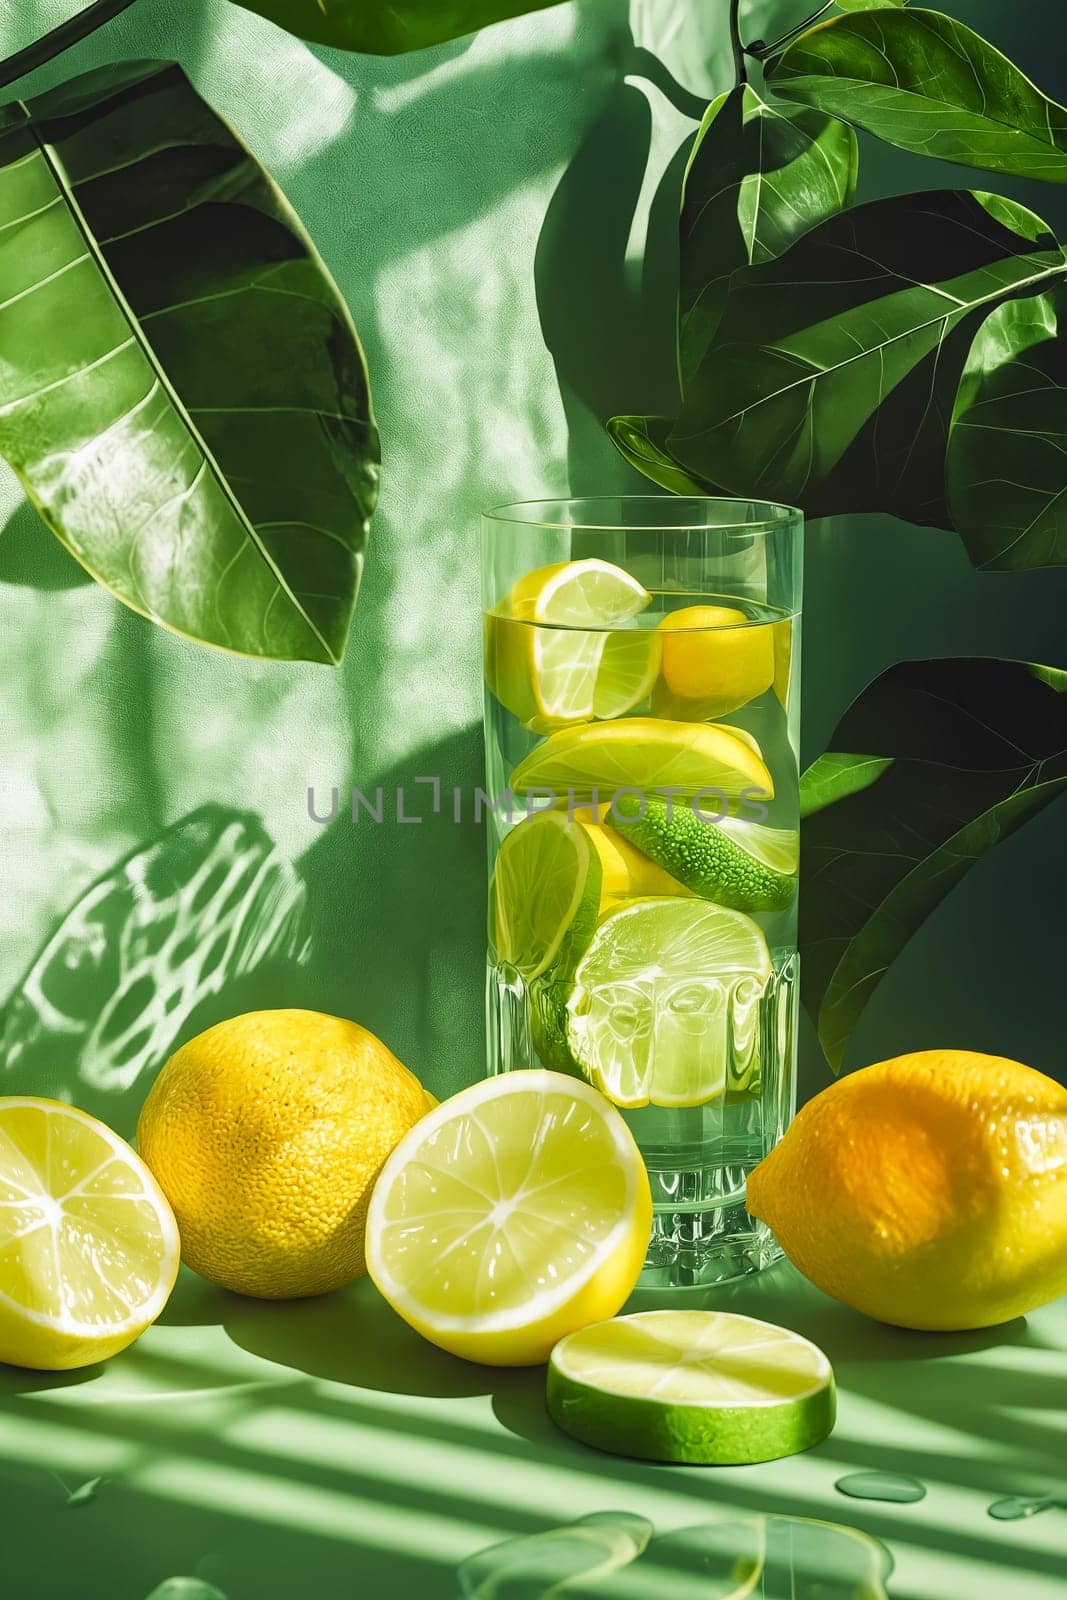 A glass of water with a few slices of lemon and lime in it. The image has a bright and refreshing mood, with the citrus fruits adding a pop of color and a hint of tanginess to the scene. Generative AI